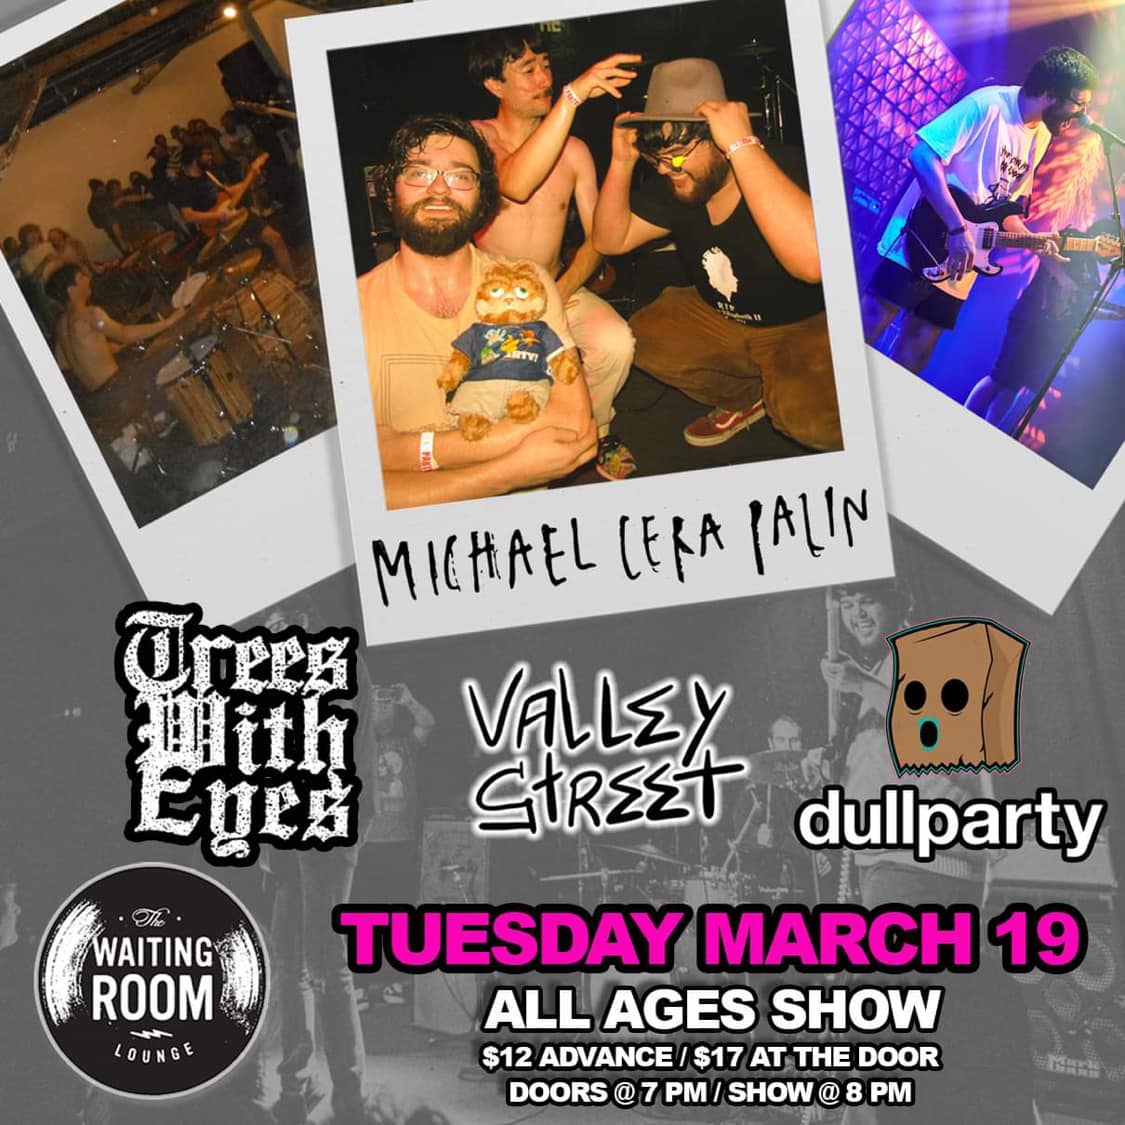 TONIGHT! Michael Cera Palin, Trees With Eyes, Valley Street and Dull Party all at The Waiting Room! 🎫 etix.com/ticket/p/43917…